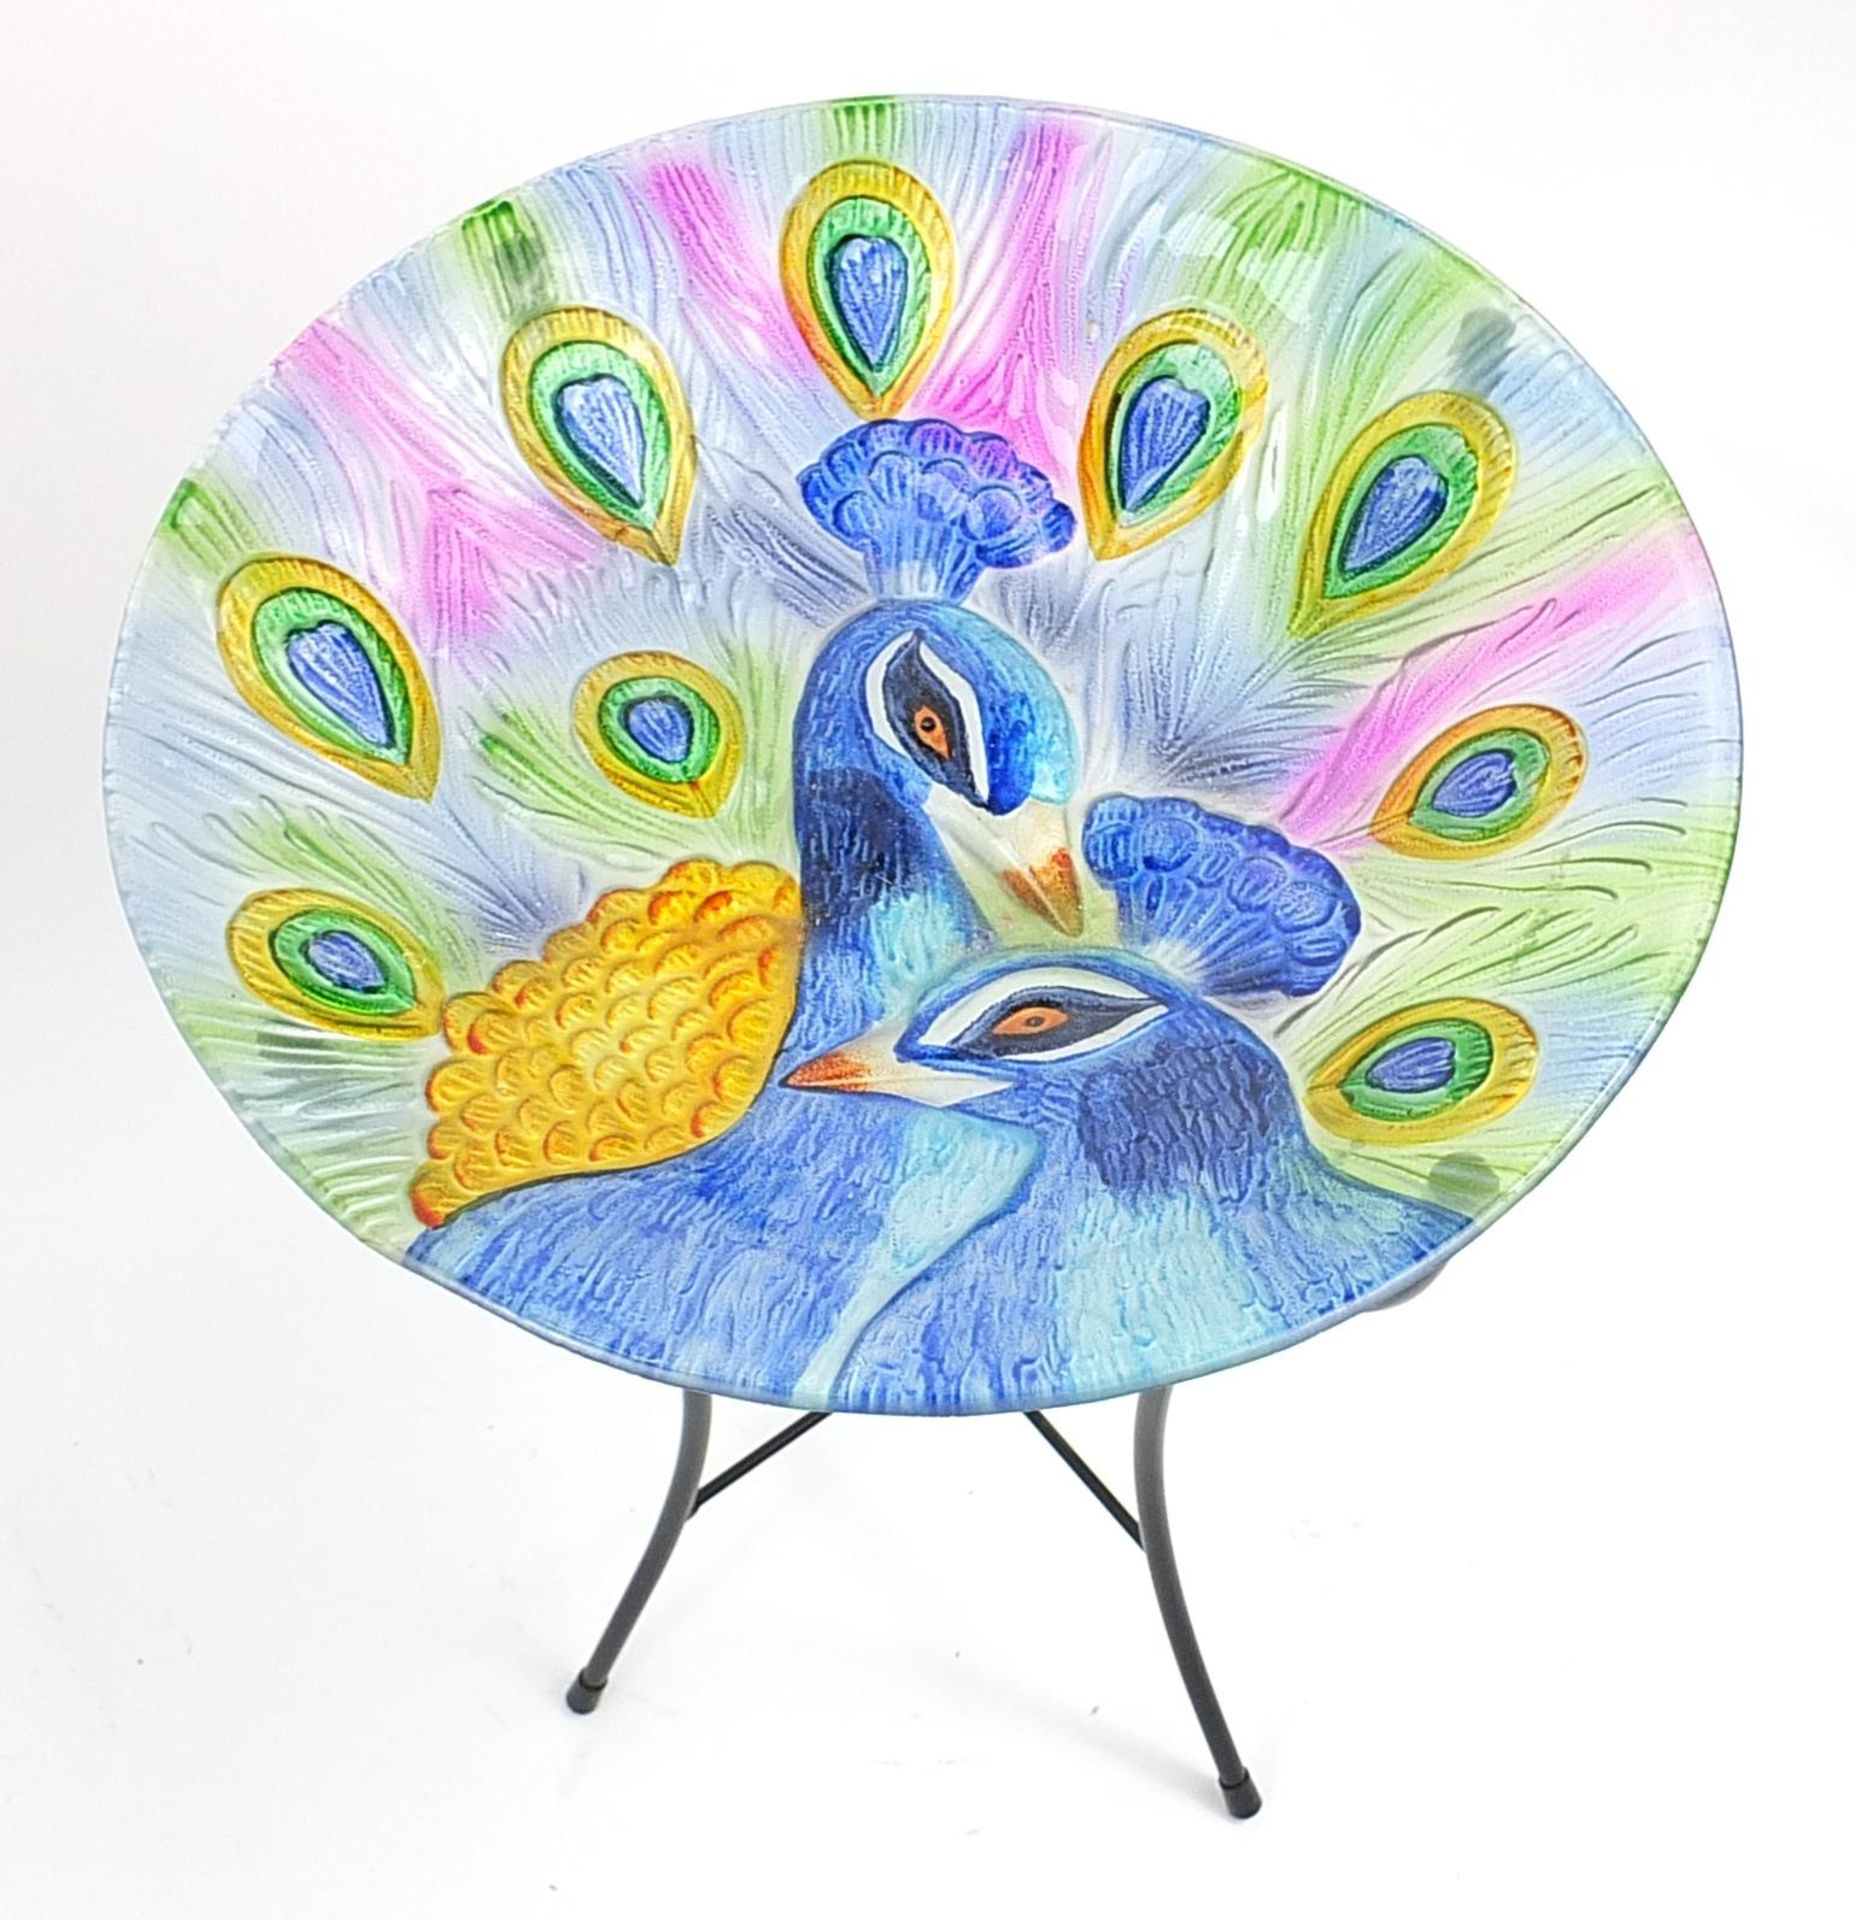 Hand painted glass top peacock table on metal stand, 50cm high x 35cm in diameter - Image 2 of 3